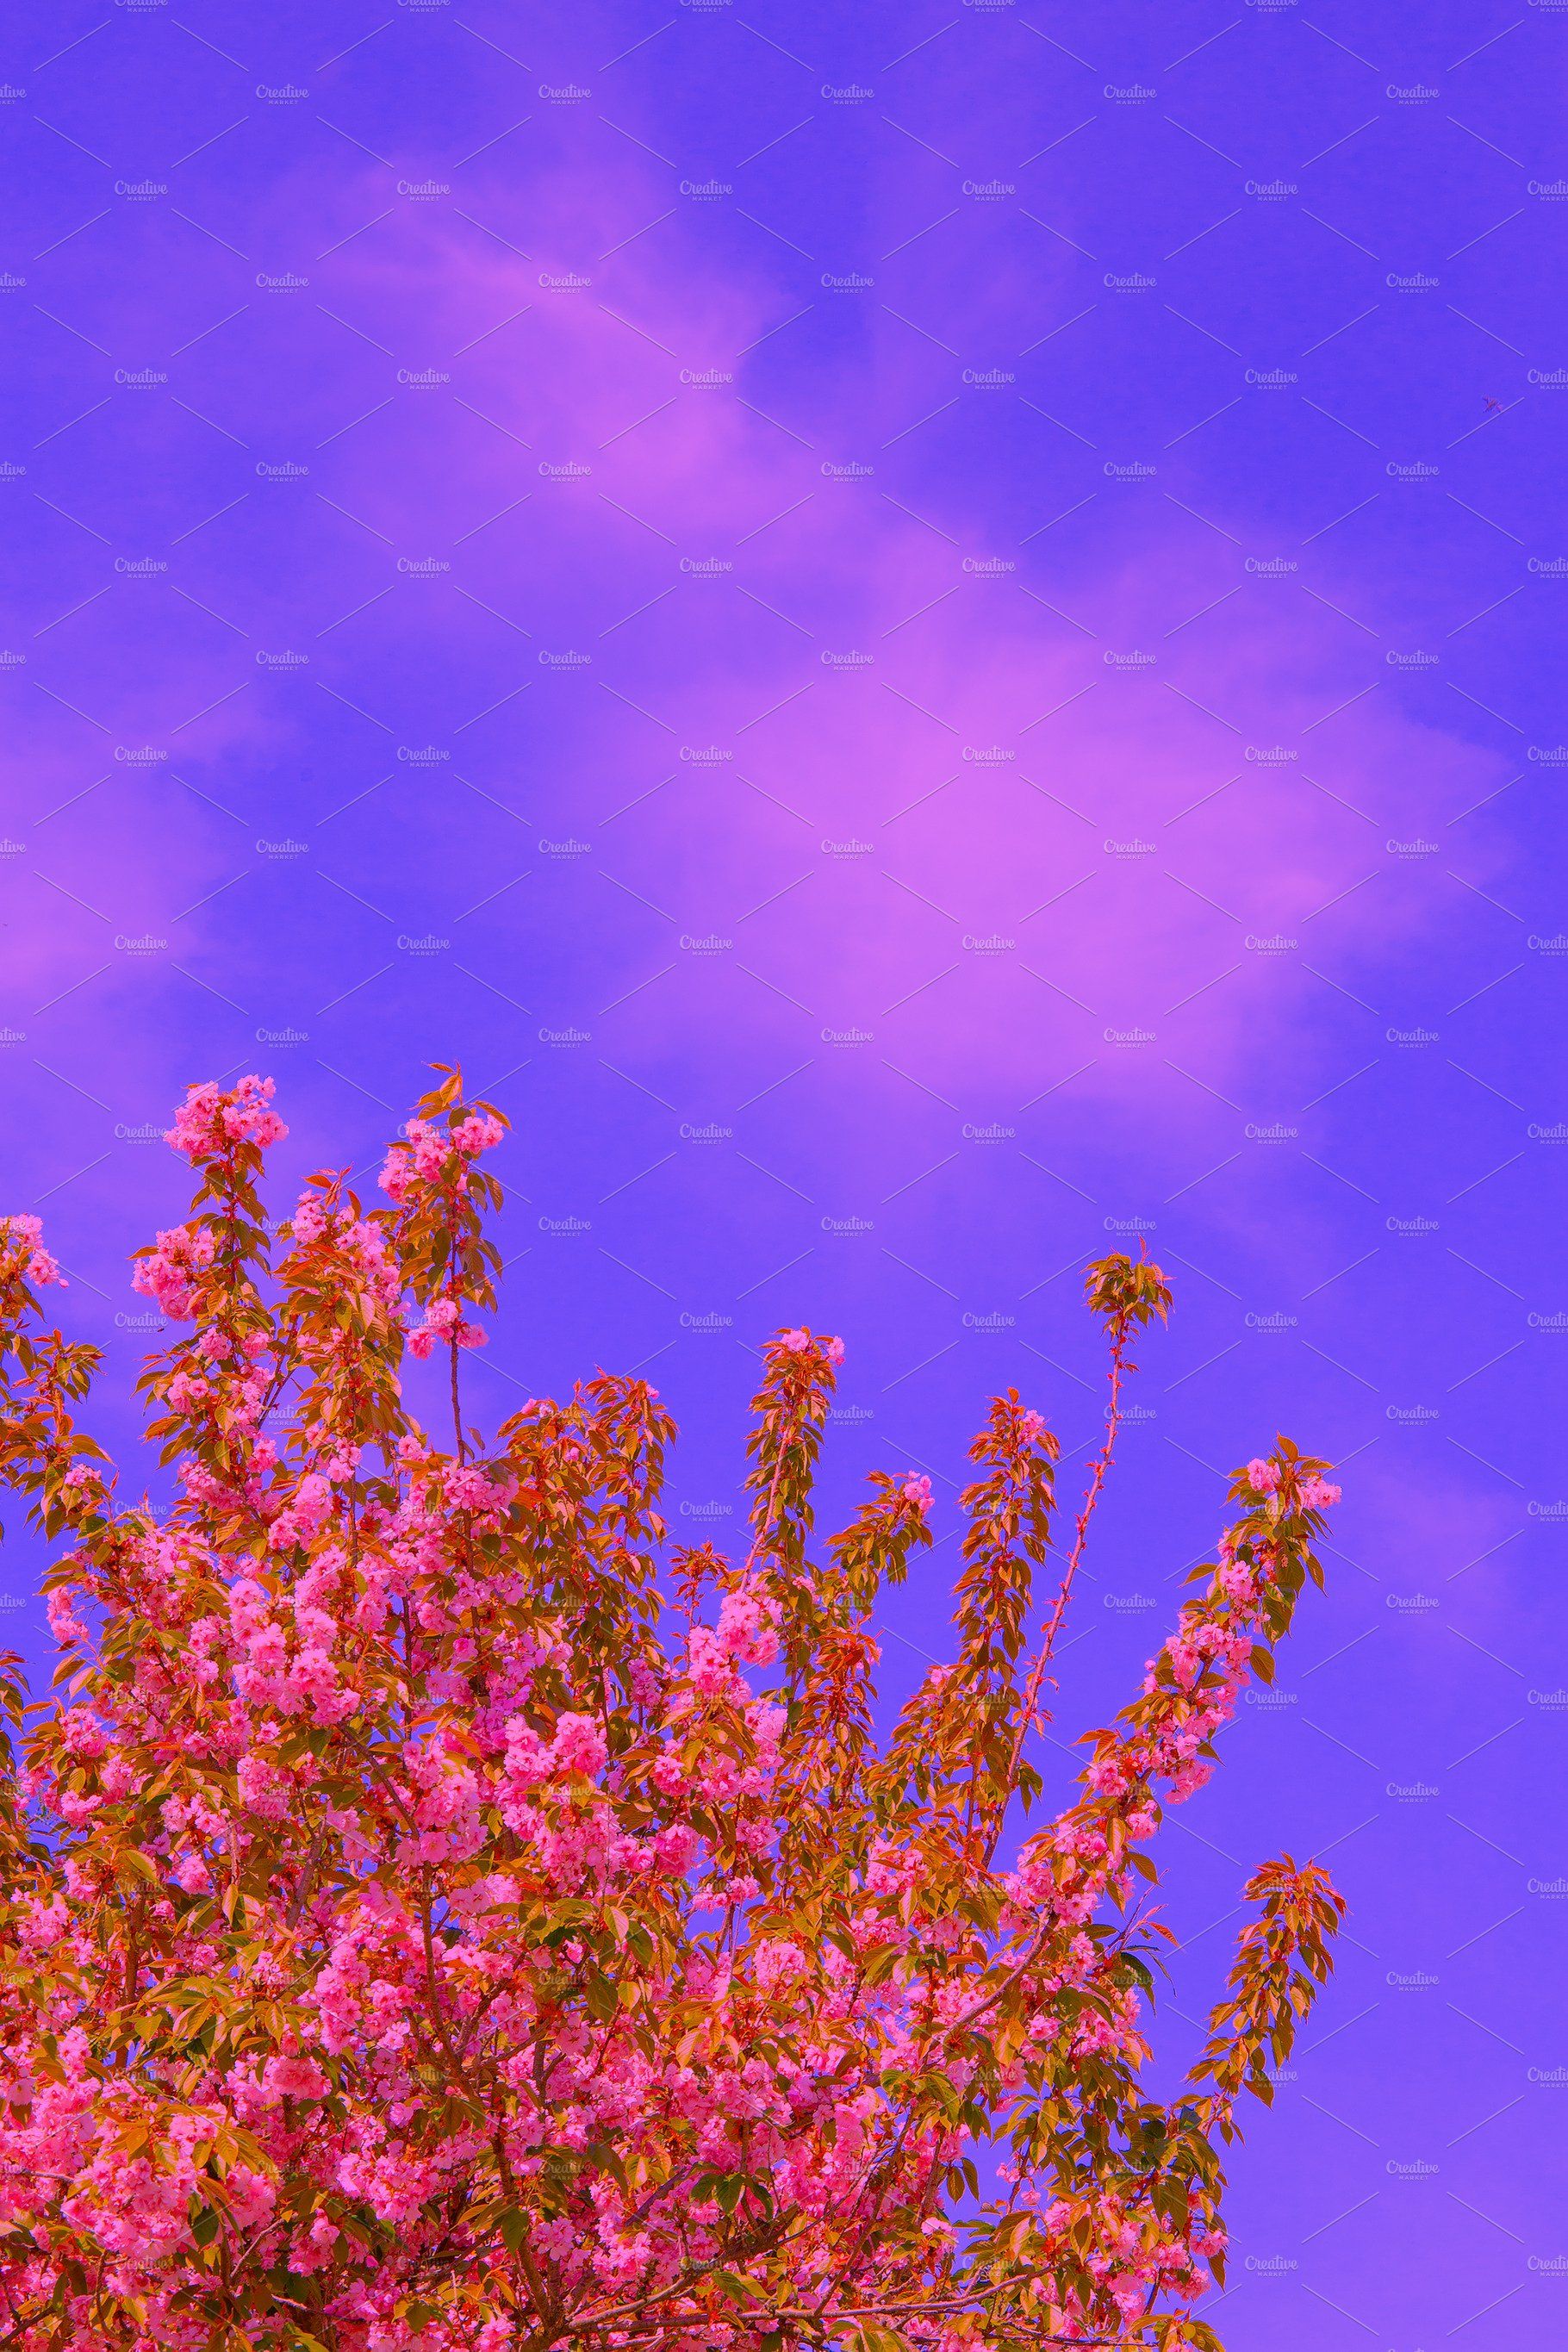 A pink tree in bloom against a purple sky - 2000s